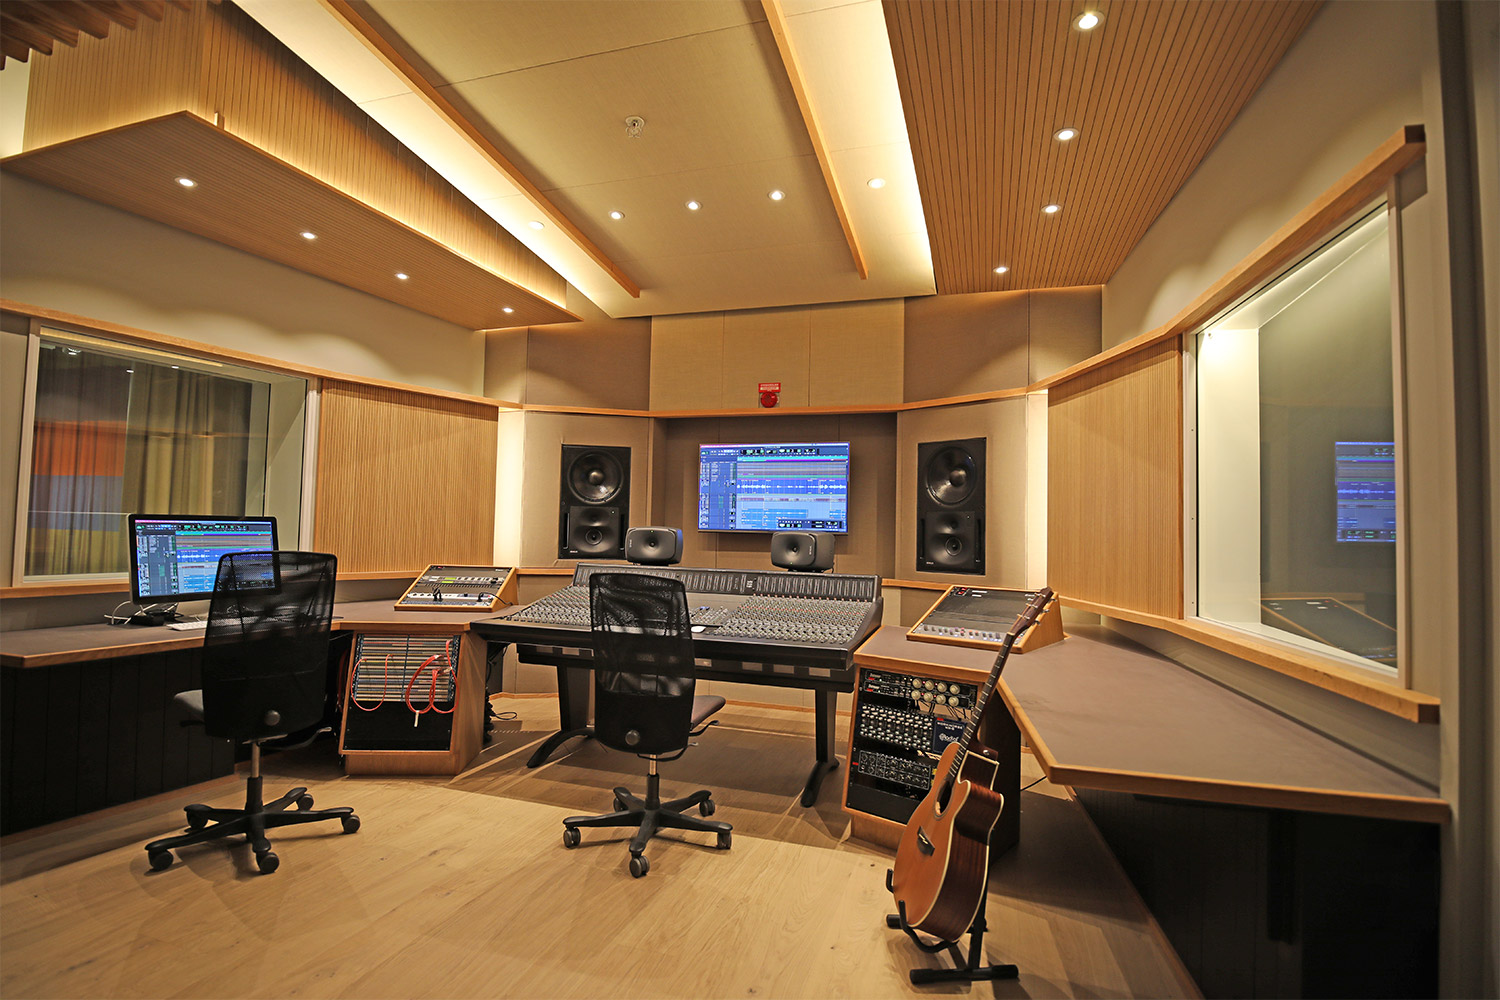 The Stockholm Royal College of Music brought on WSDG to design their new studio control rooms to meet the highest standards of acoustic and technological excellence. Control Room.